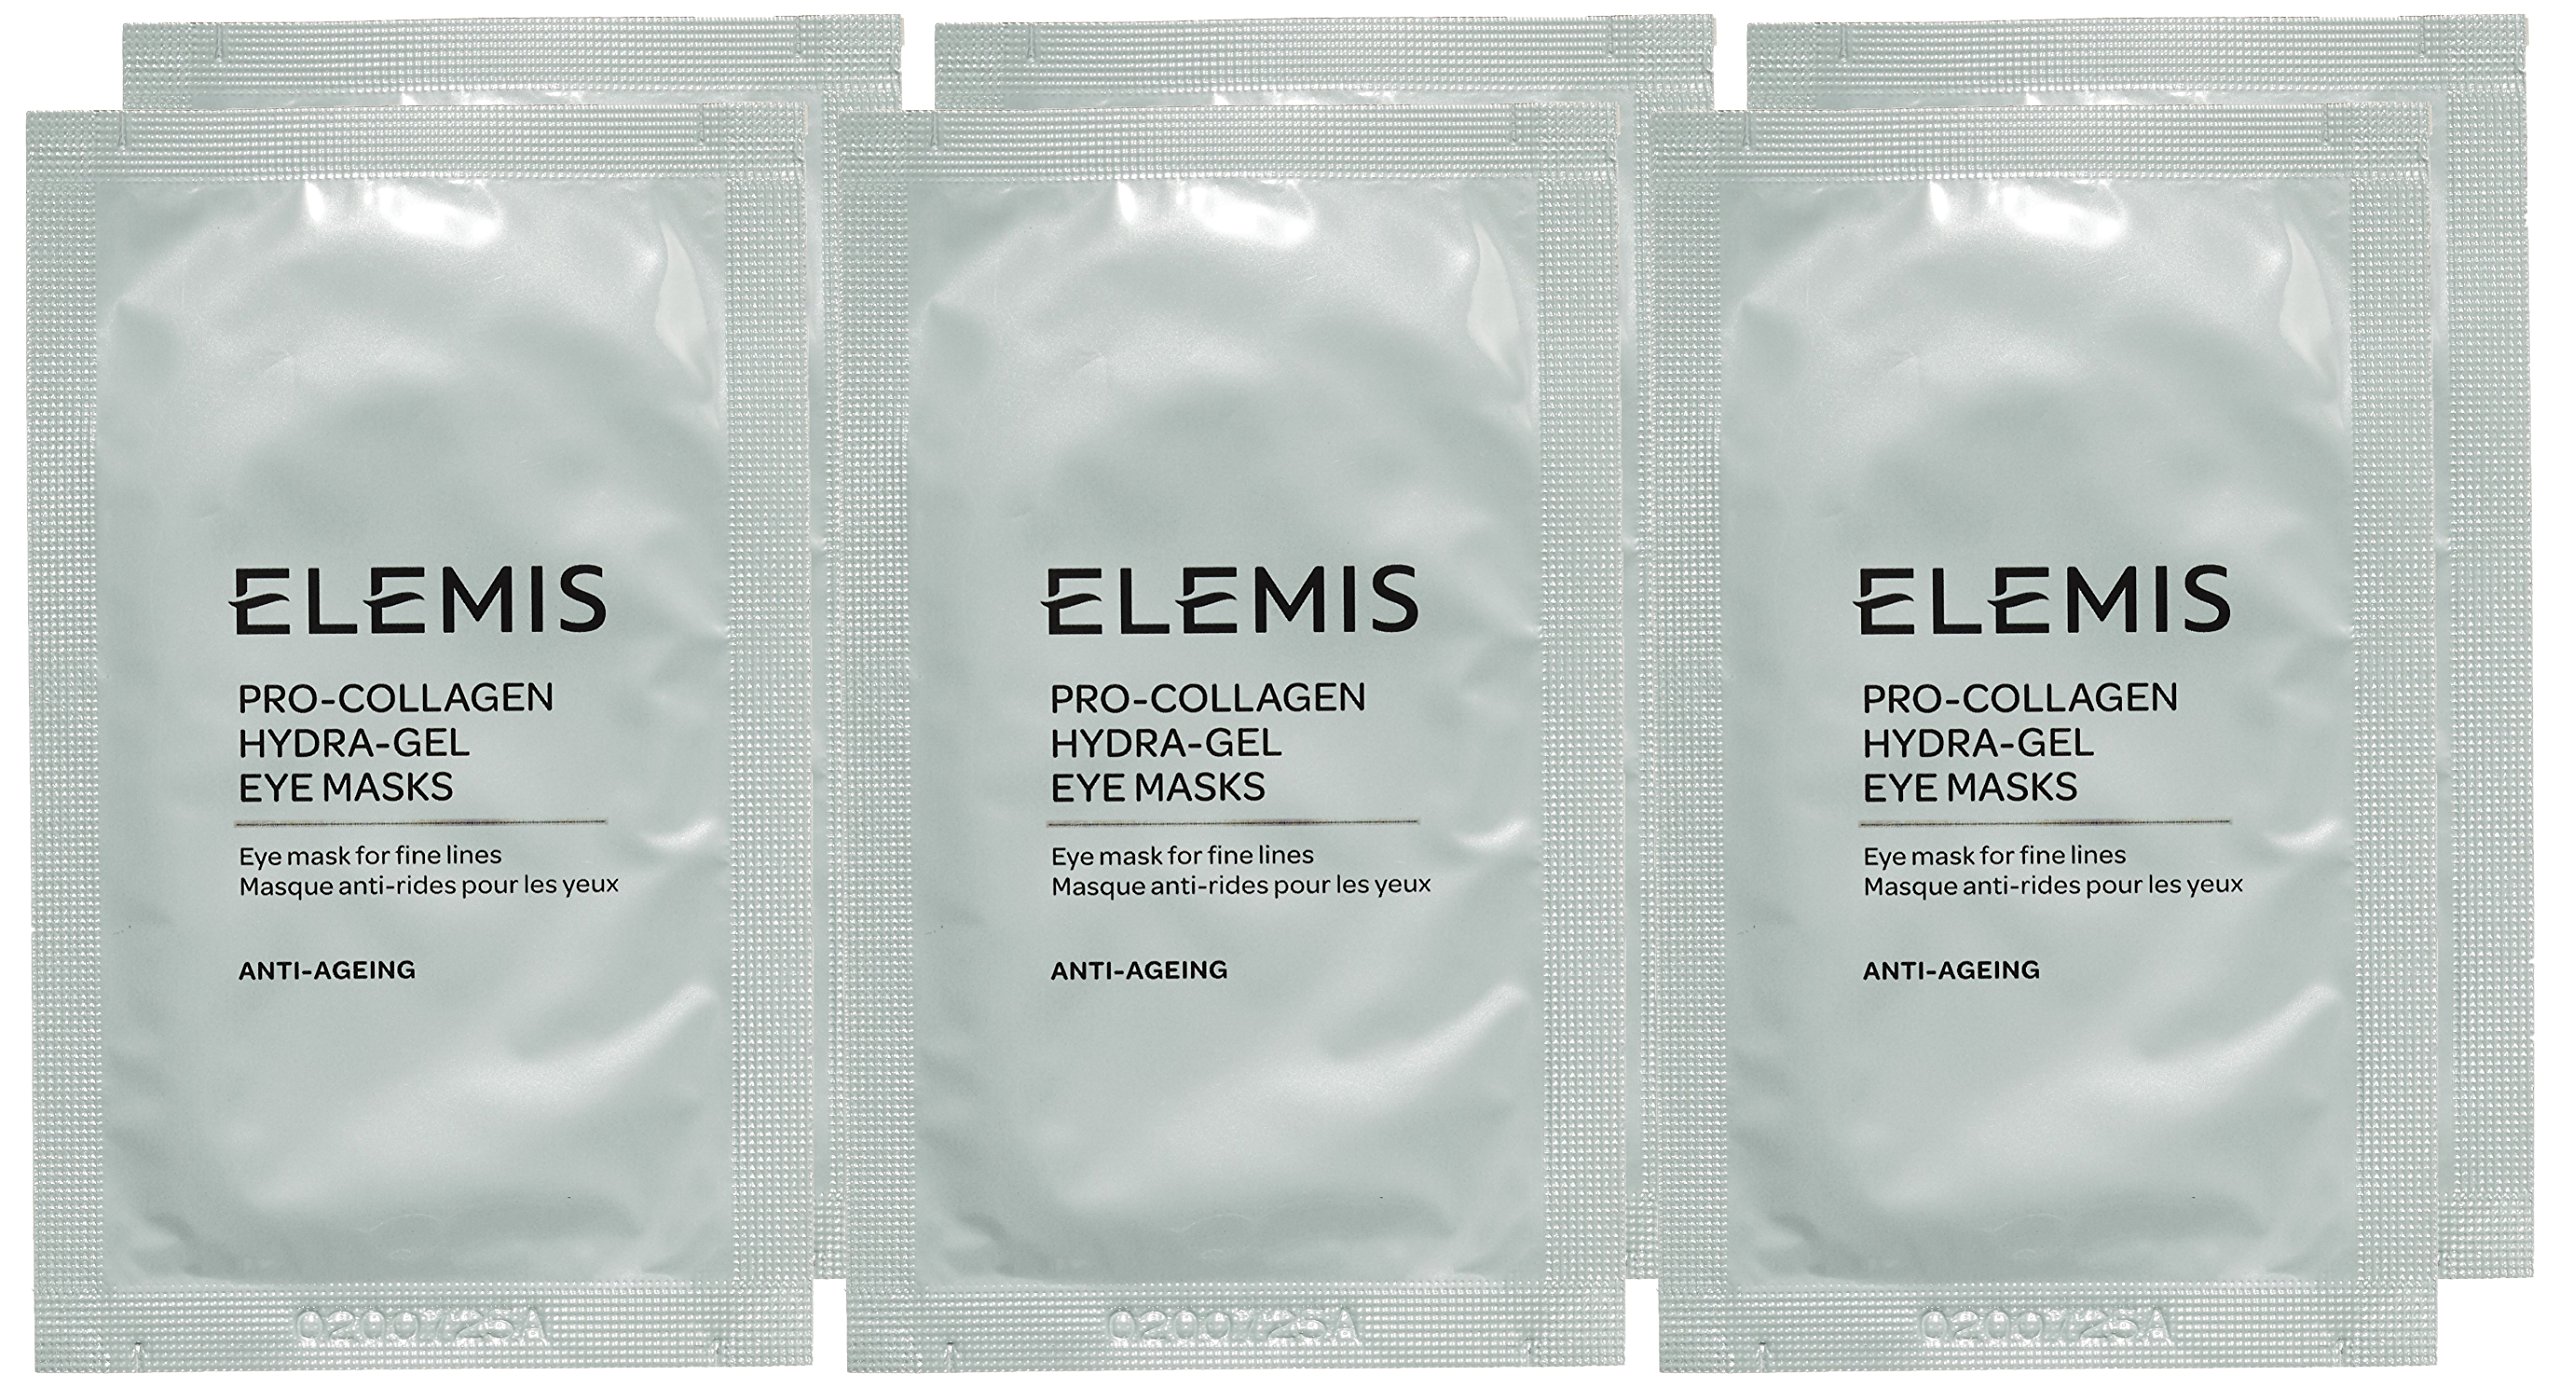 ELEMIS Pro-Collagen Hydra-Gel Eye Masks, Under-Eye Treatment Hydrates, Smooths, Tightens & Help Visibly Reduce the Look of Lines & Wrinkles, Pack of 6